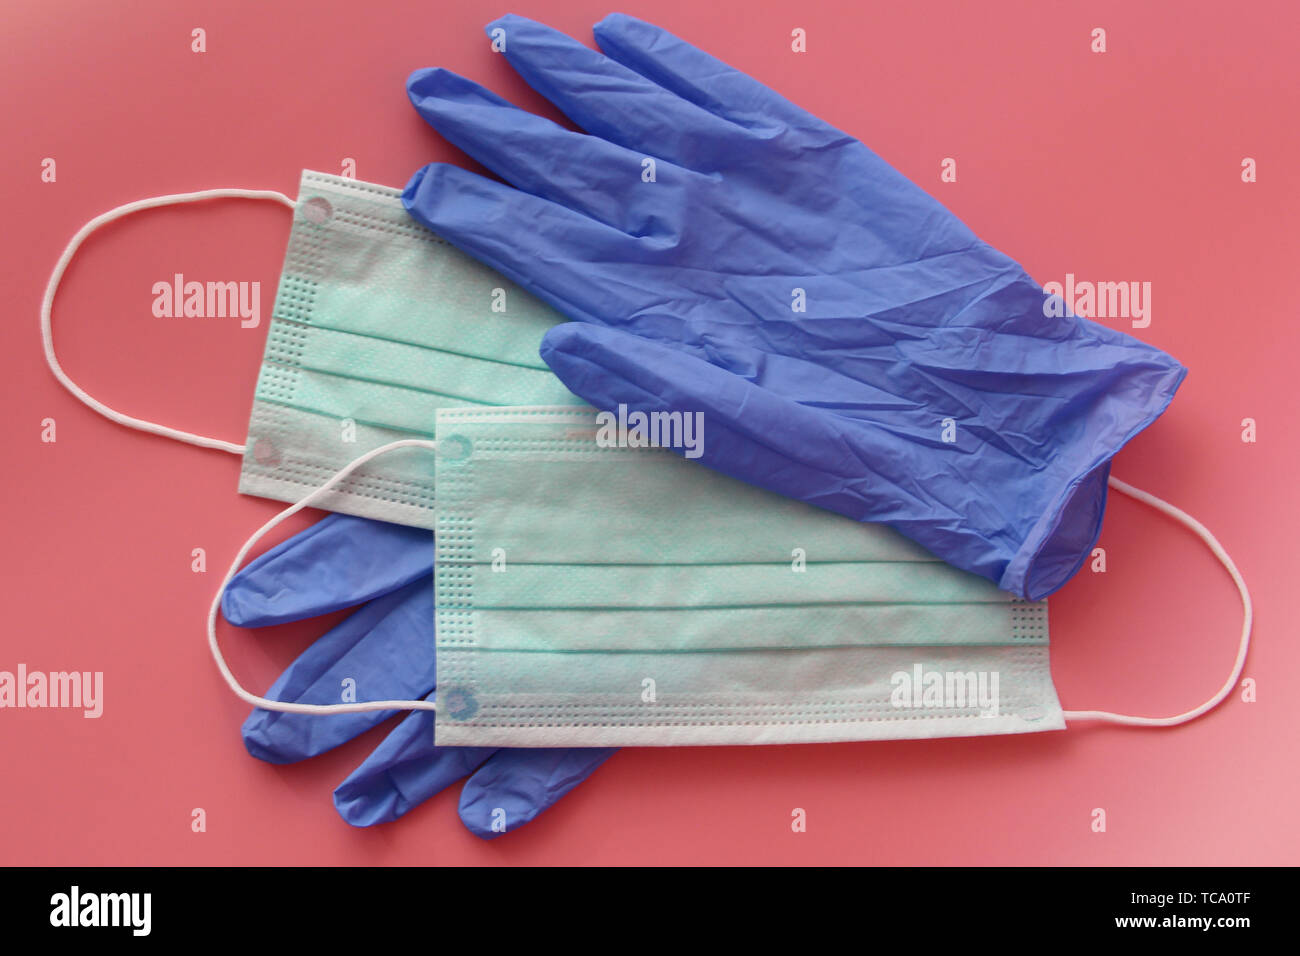 Disposable medical mask and latex gloves. Medical kit essential disposable items. Medical protection of the face and hands. Pink background. Stock Photo